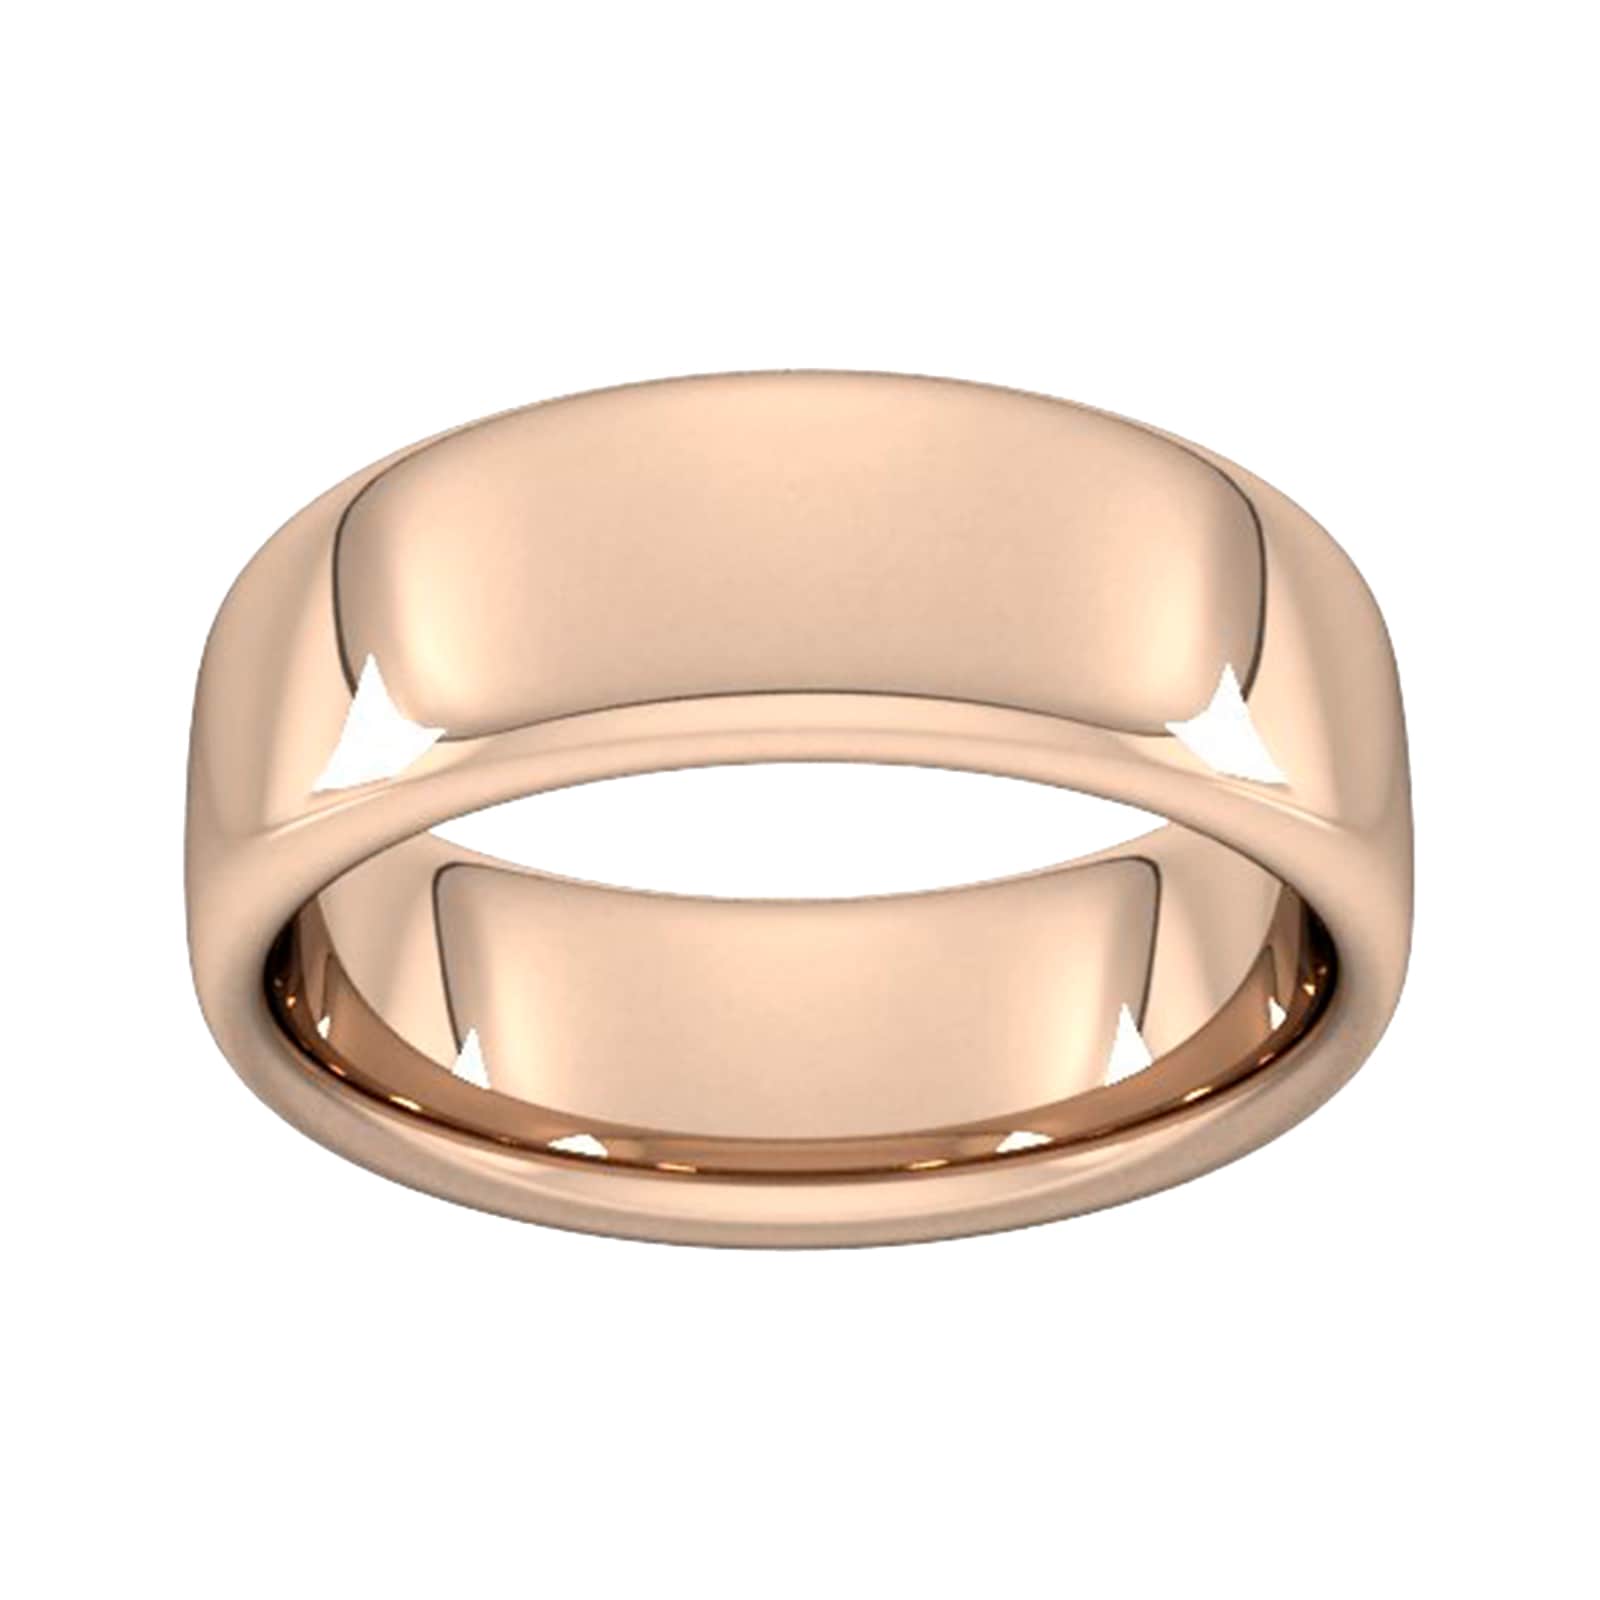 8mm Slight Court Extra Heavy Wedding Ring In 18 Carat Rose Gold - Ring Size L